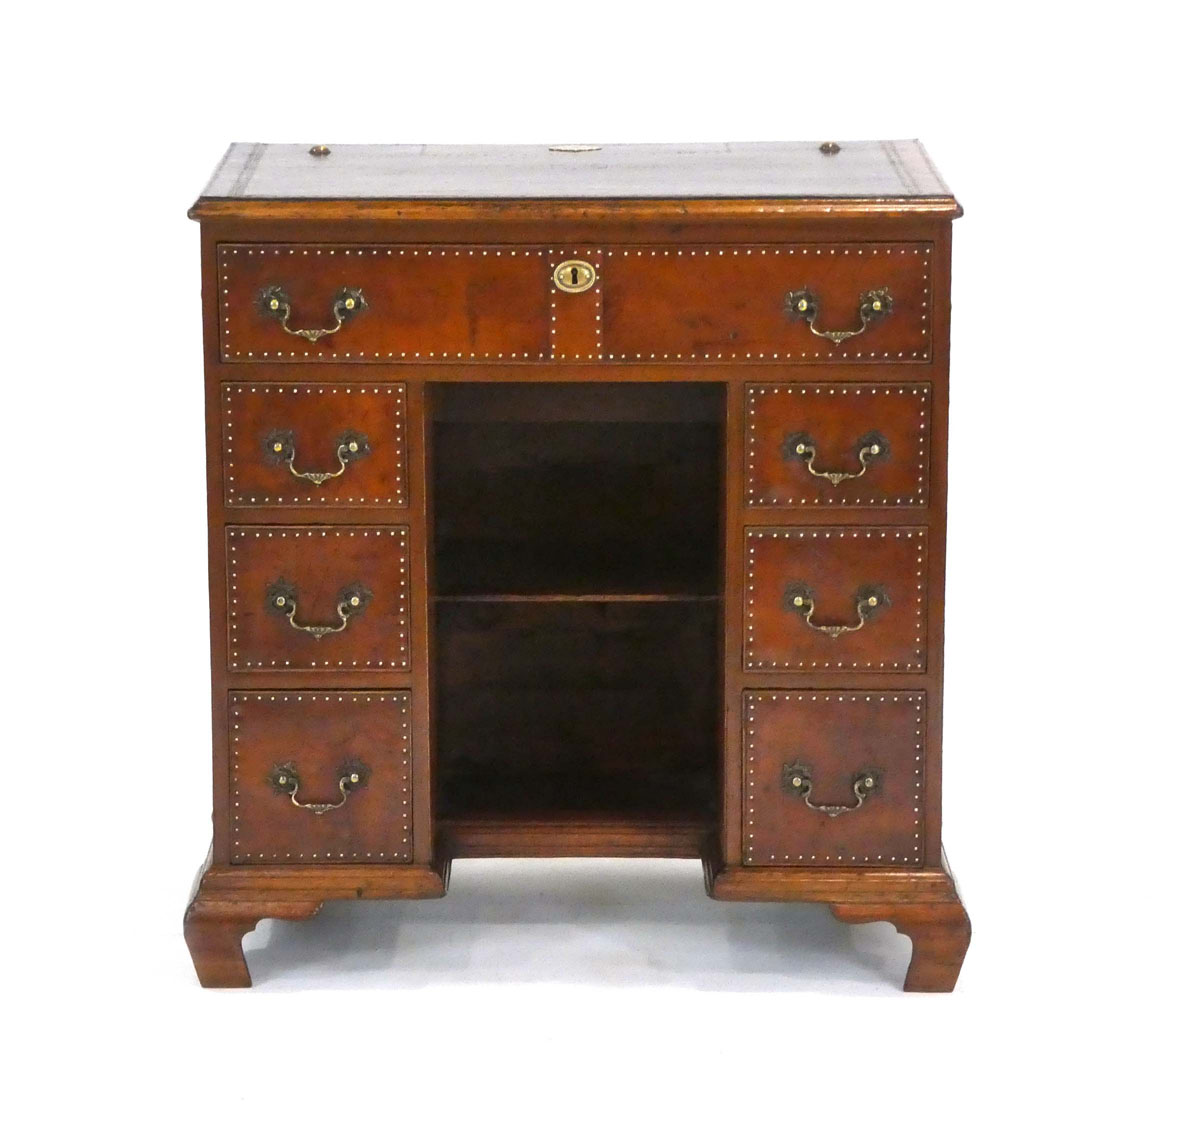 A Georgian mahogany knee-hole desk covered in leather with brass studwork and handles, on ogee feet,